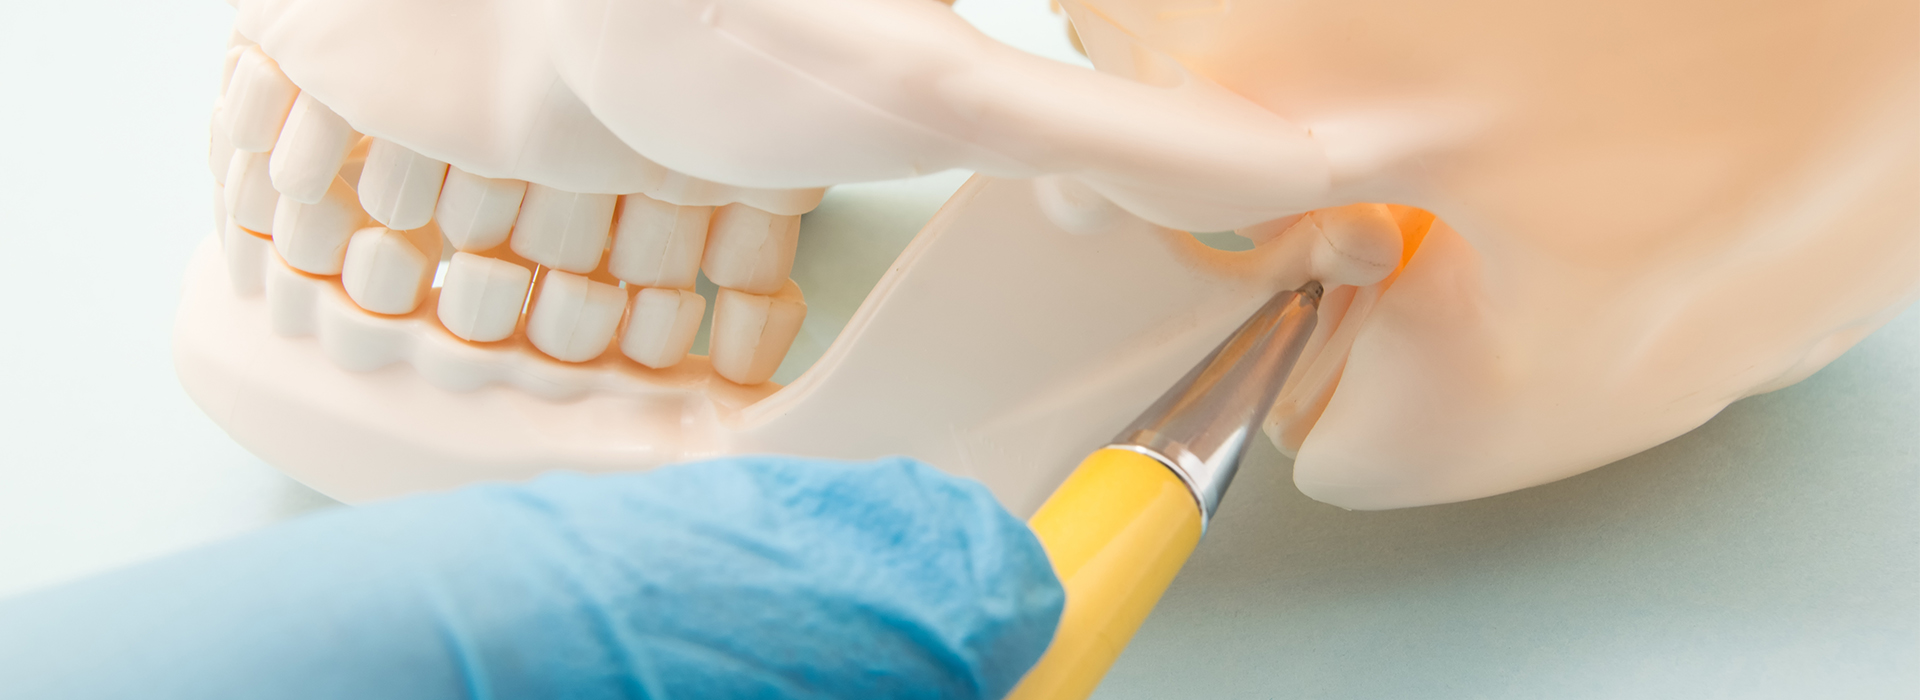 Rosenthal Dental Group | Dentures, Pediatric Dentistry and Cosmetic Dentistry